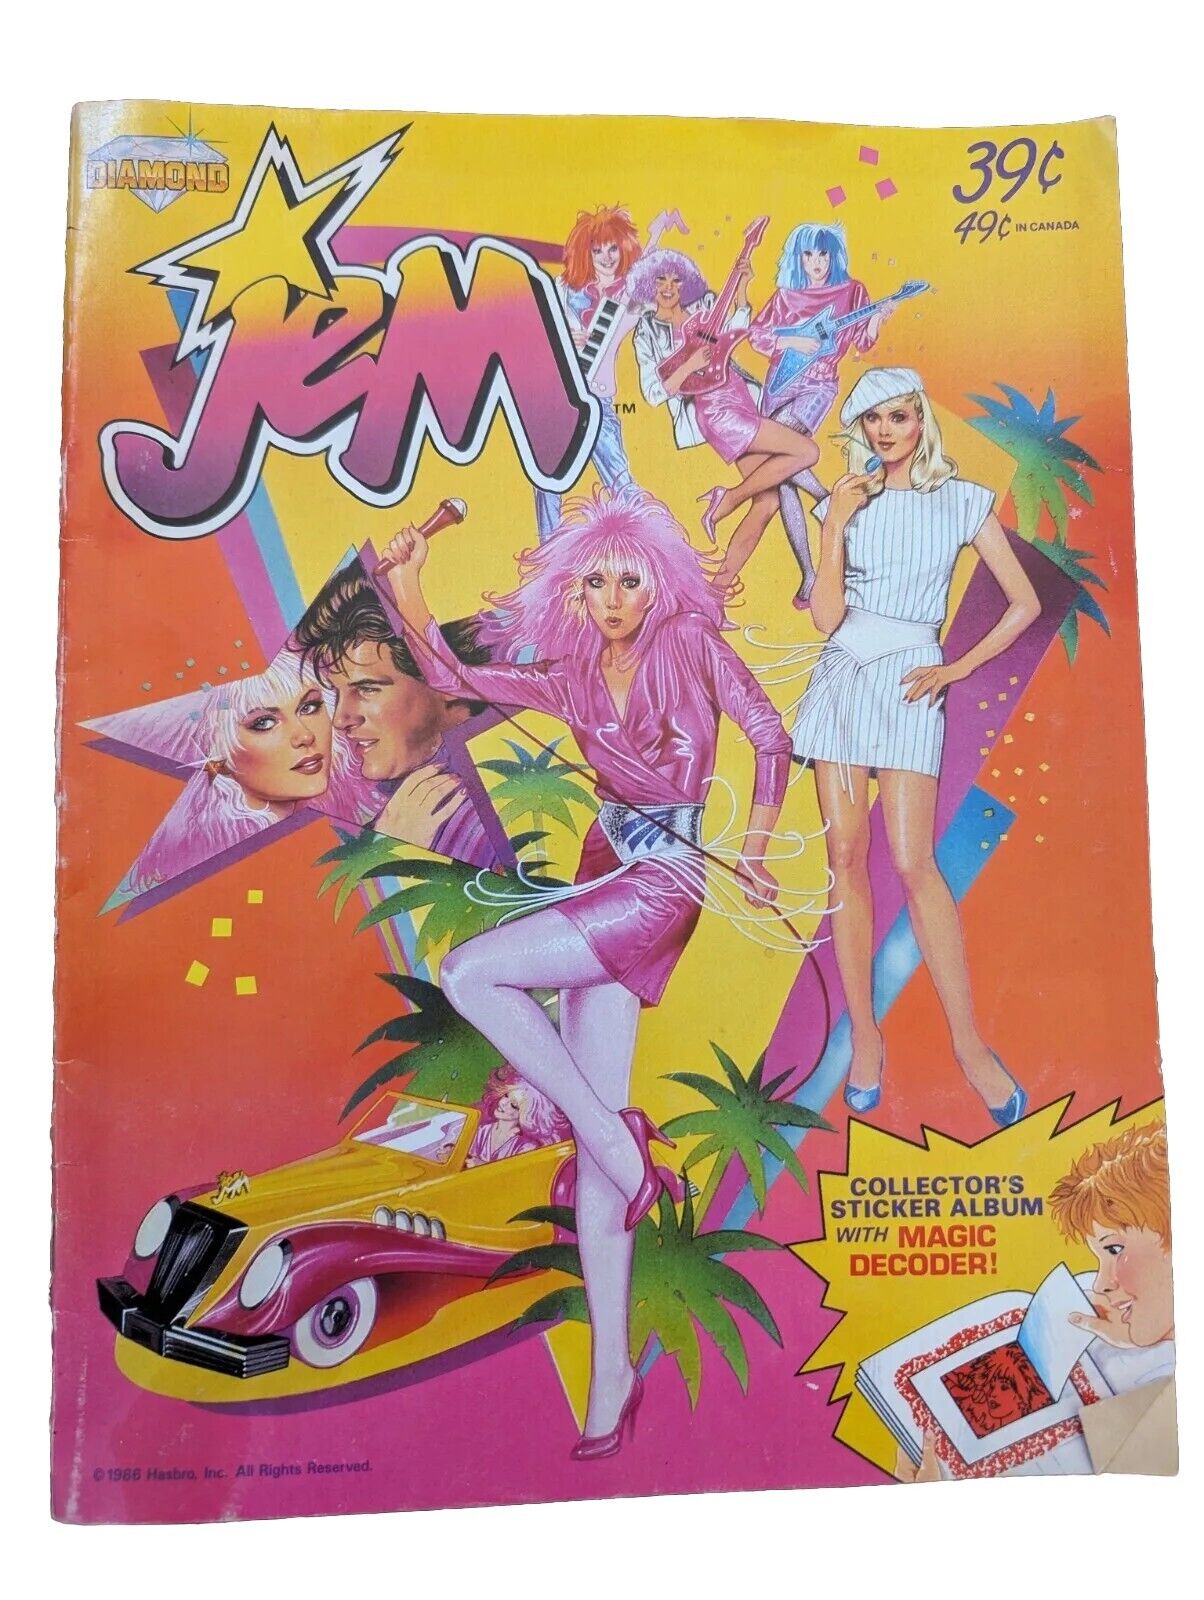 Vintage 1986 Jem and the Holograms Sticker Album Book Stickers HASBRO NO DECODER